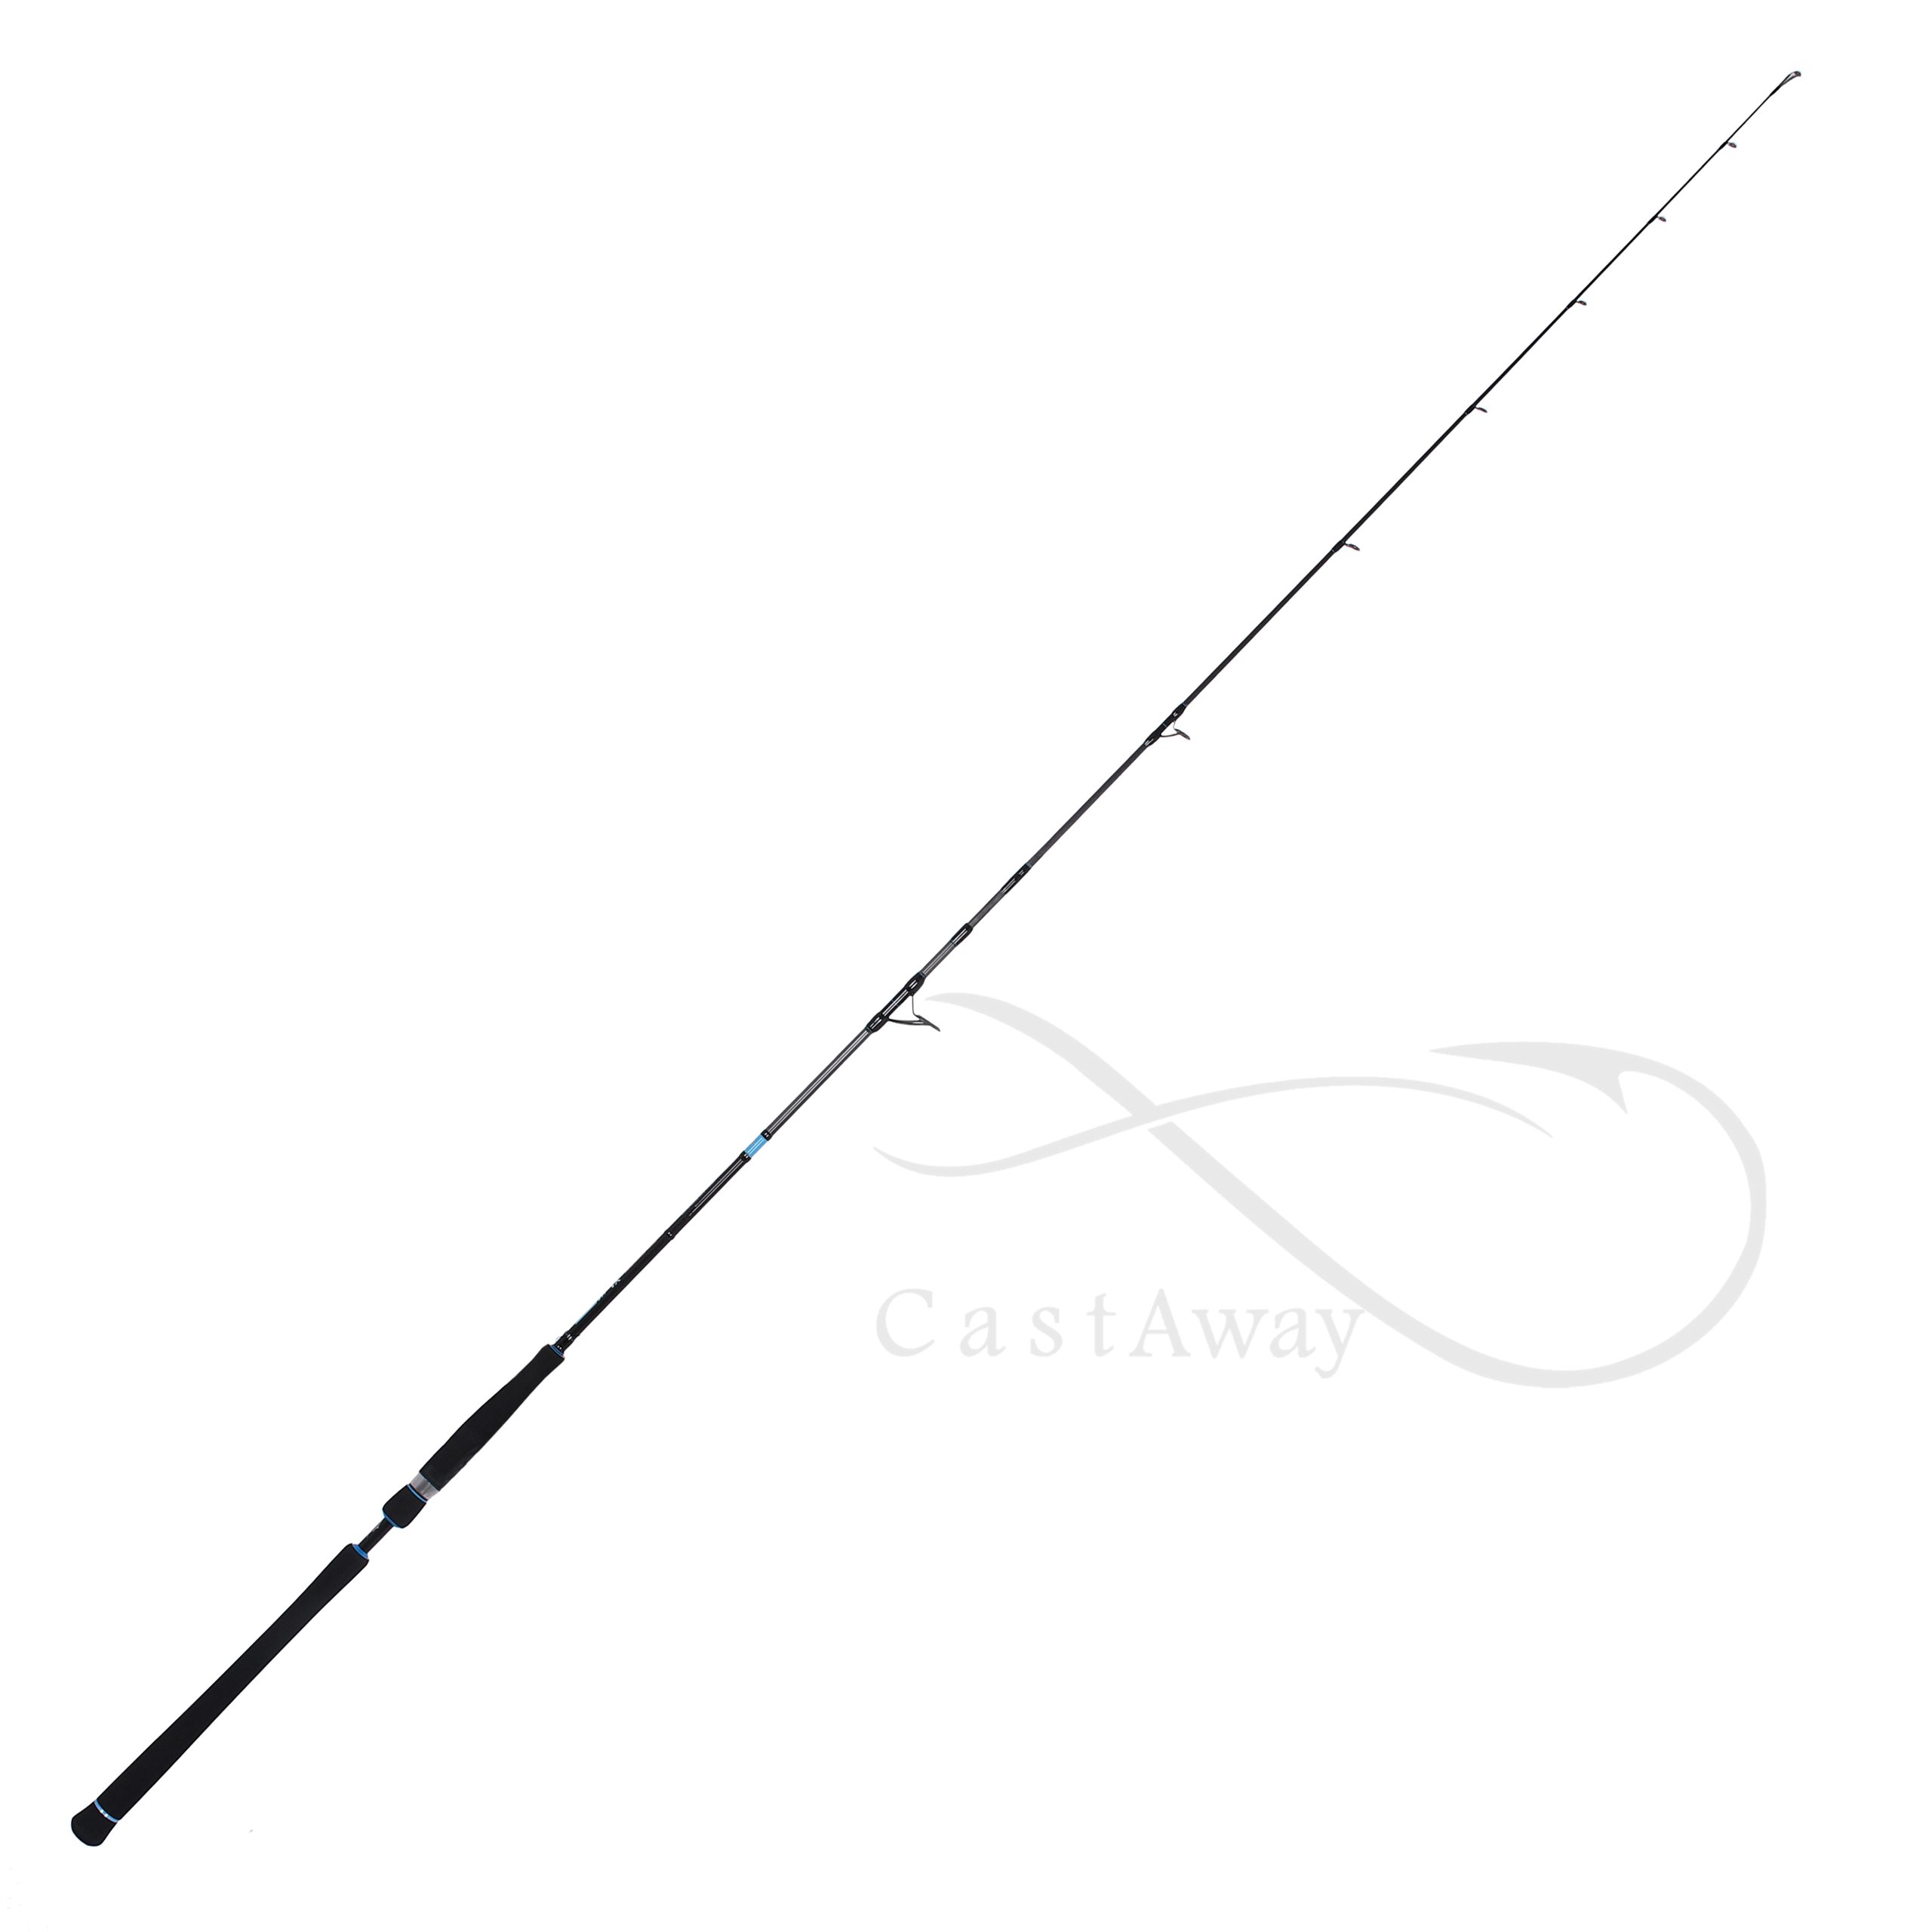 Favorite X1 SW Offshore Spinning Rod - Castaway - Reel me into the sea